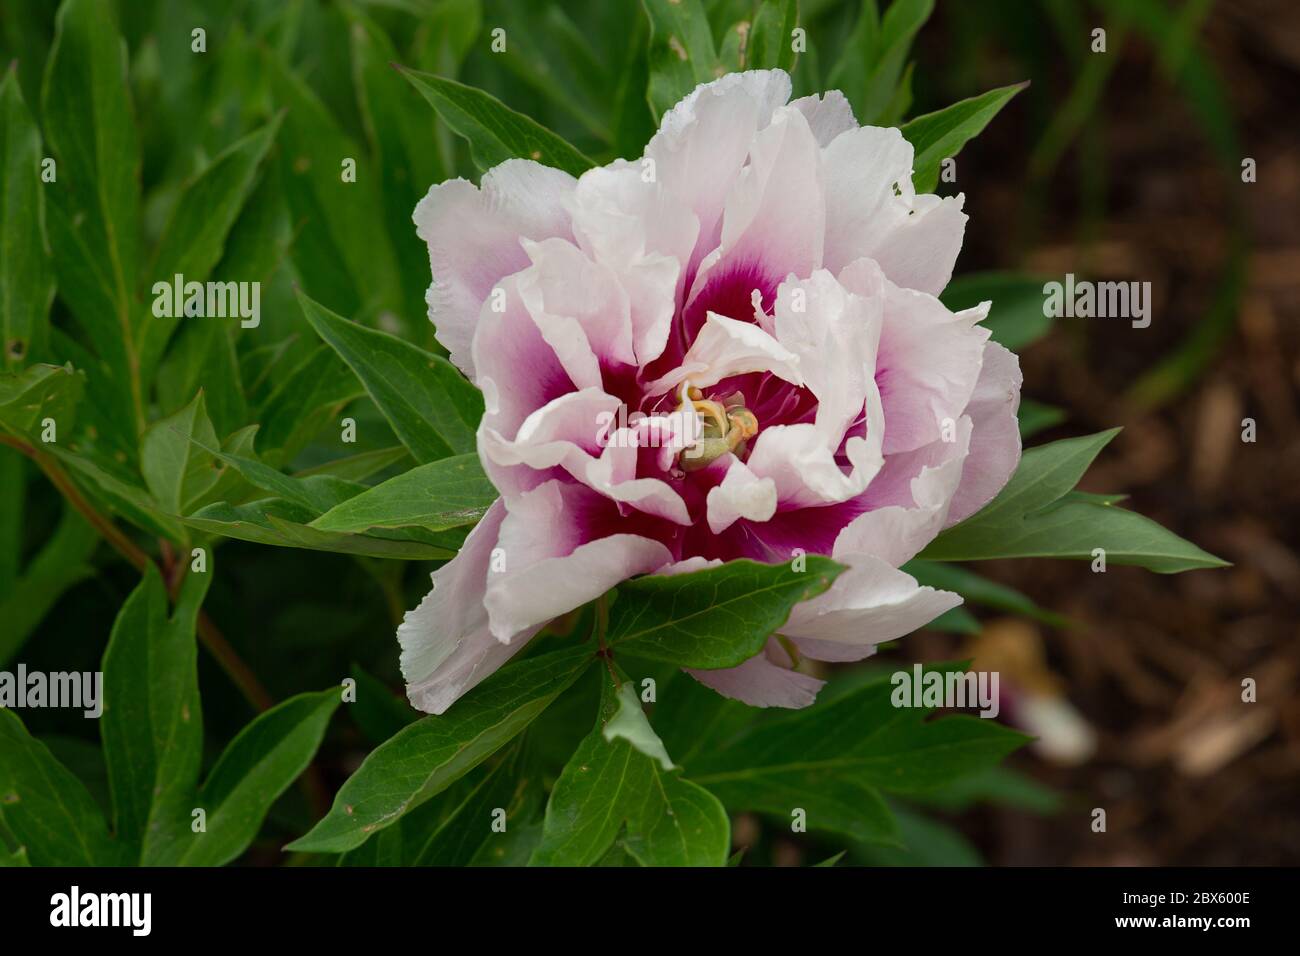 Fragrant flower of the itoh peony vision of sugar plums Stock Photo